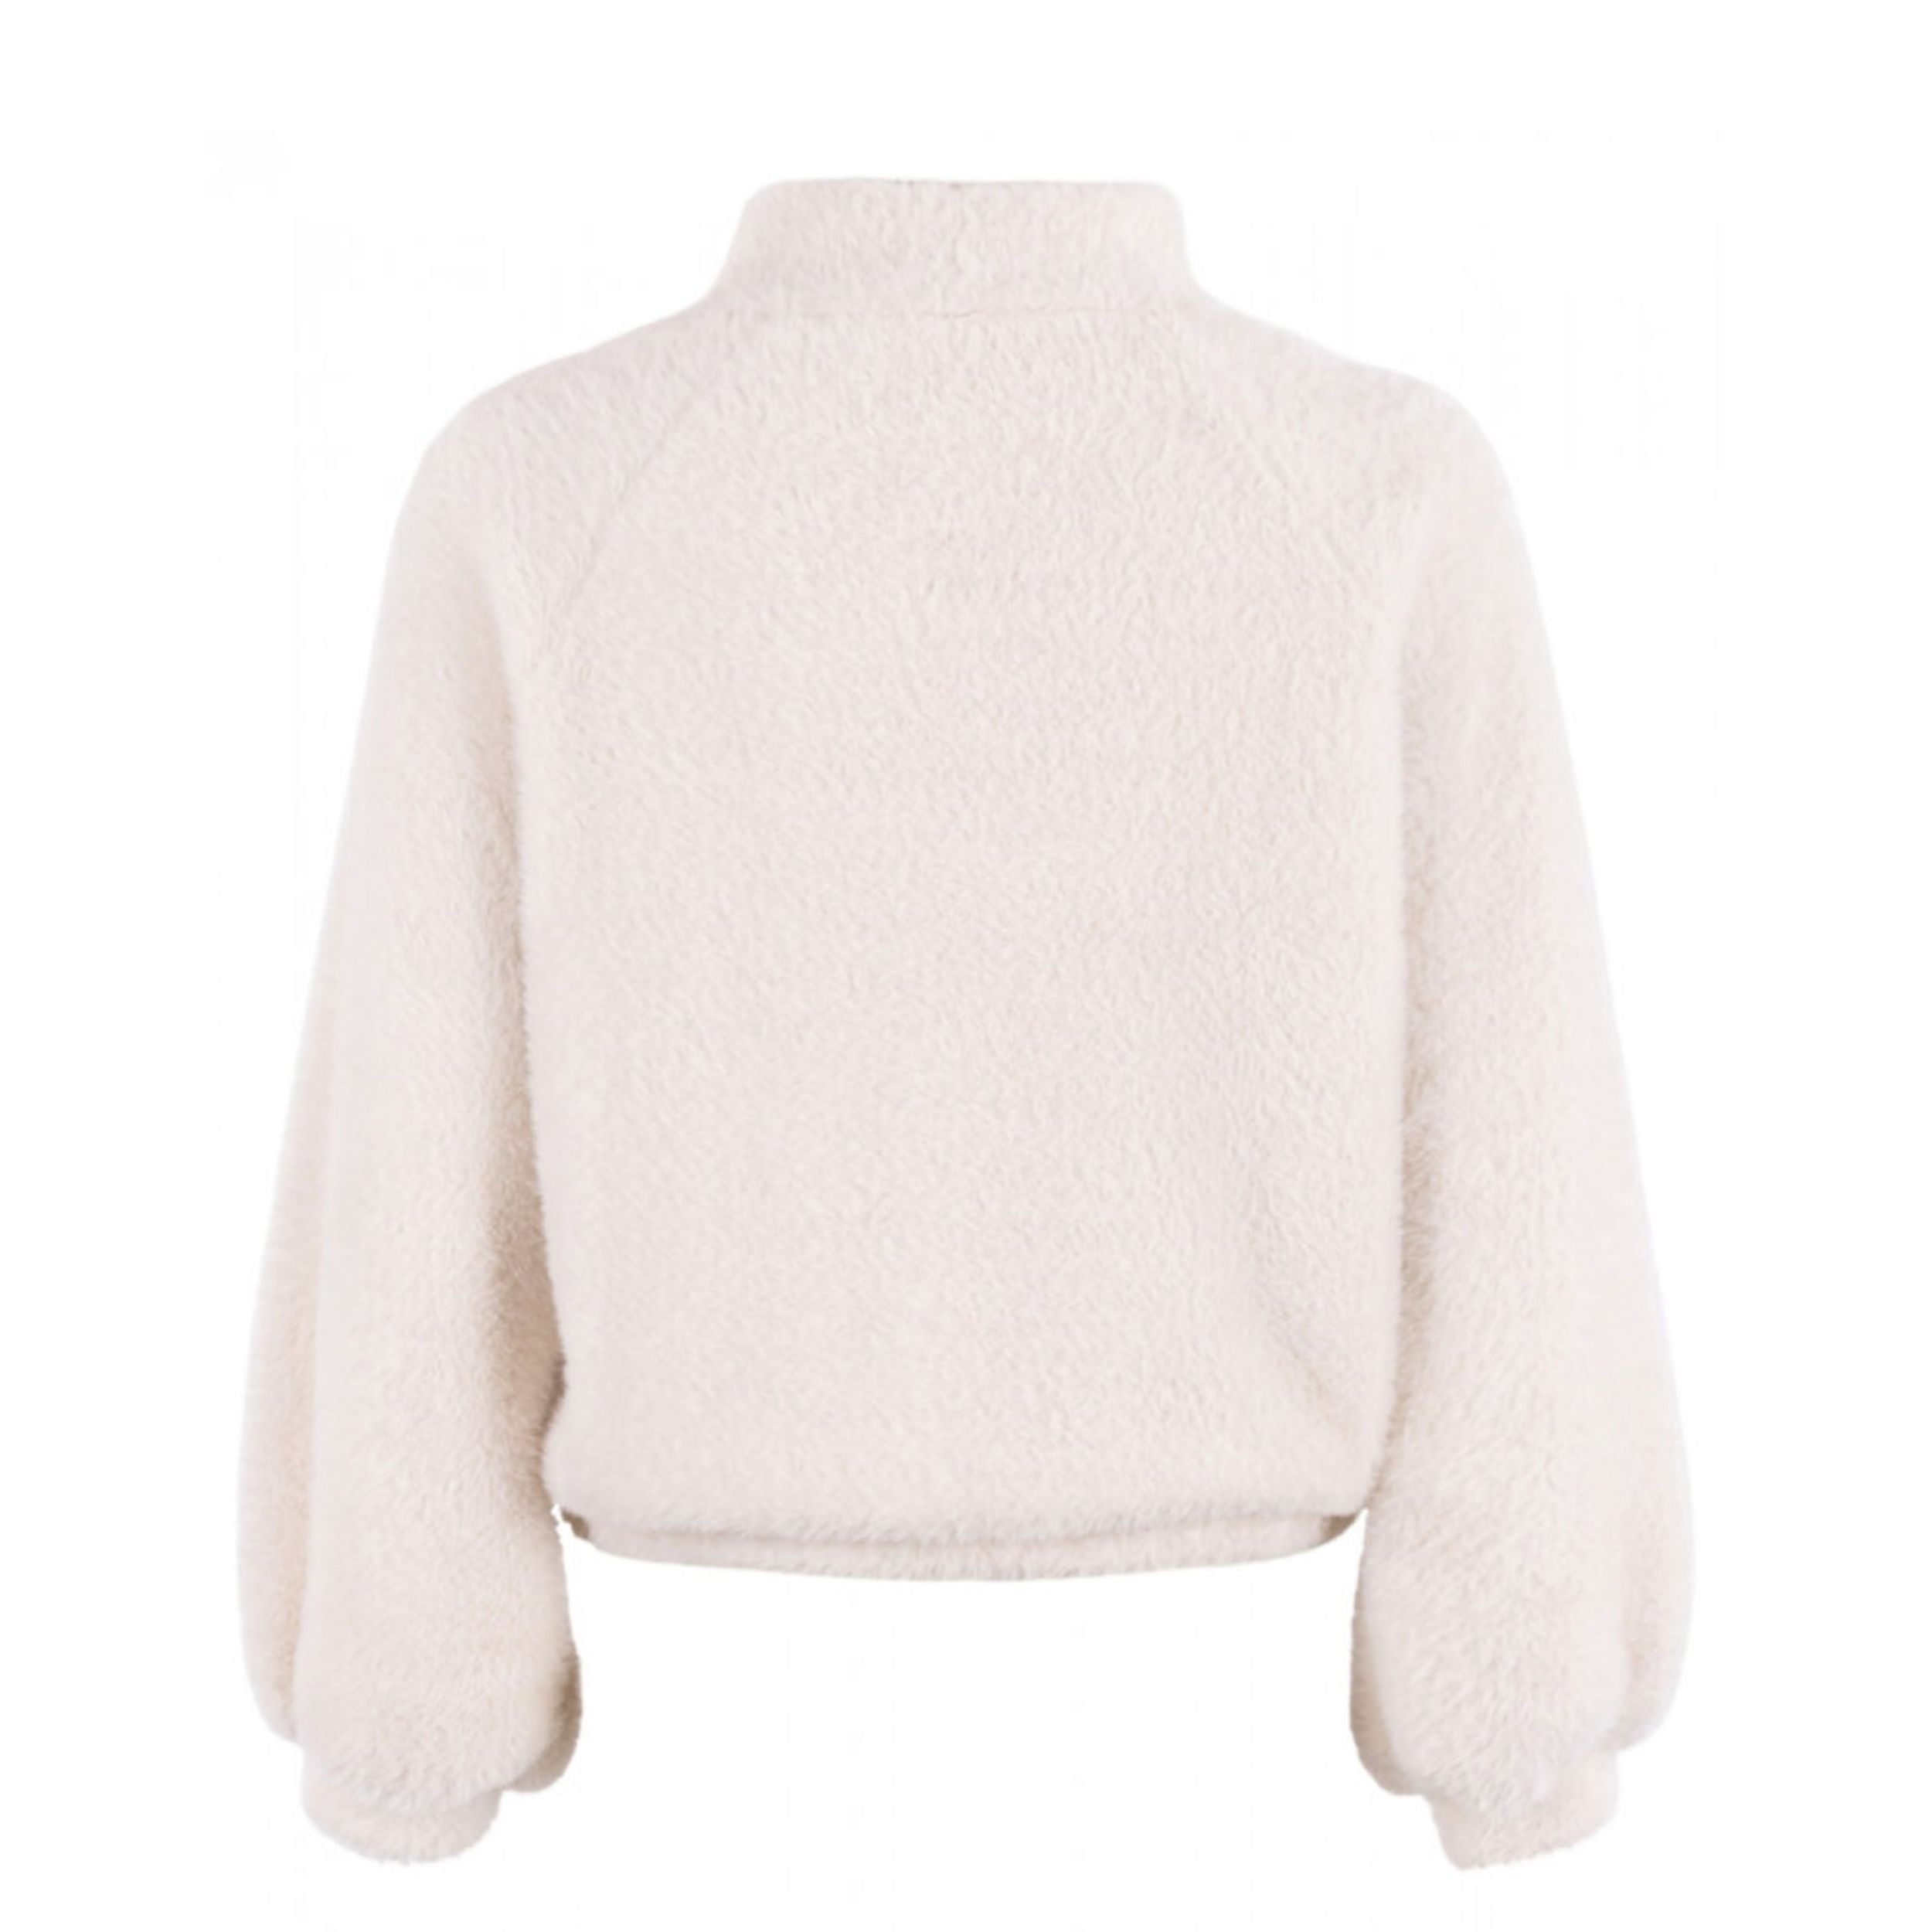 Moscow Design Fell Pullover "Tristana"